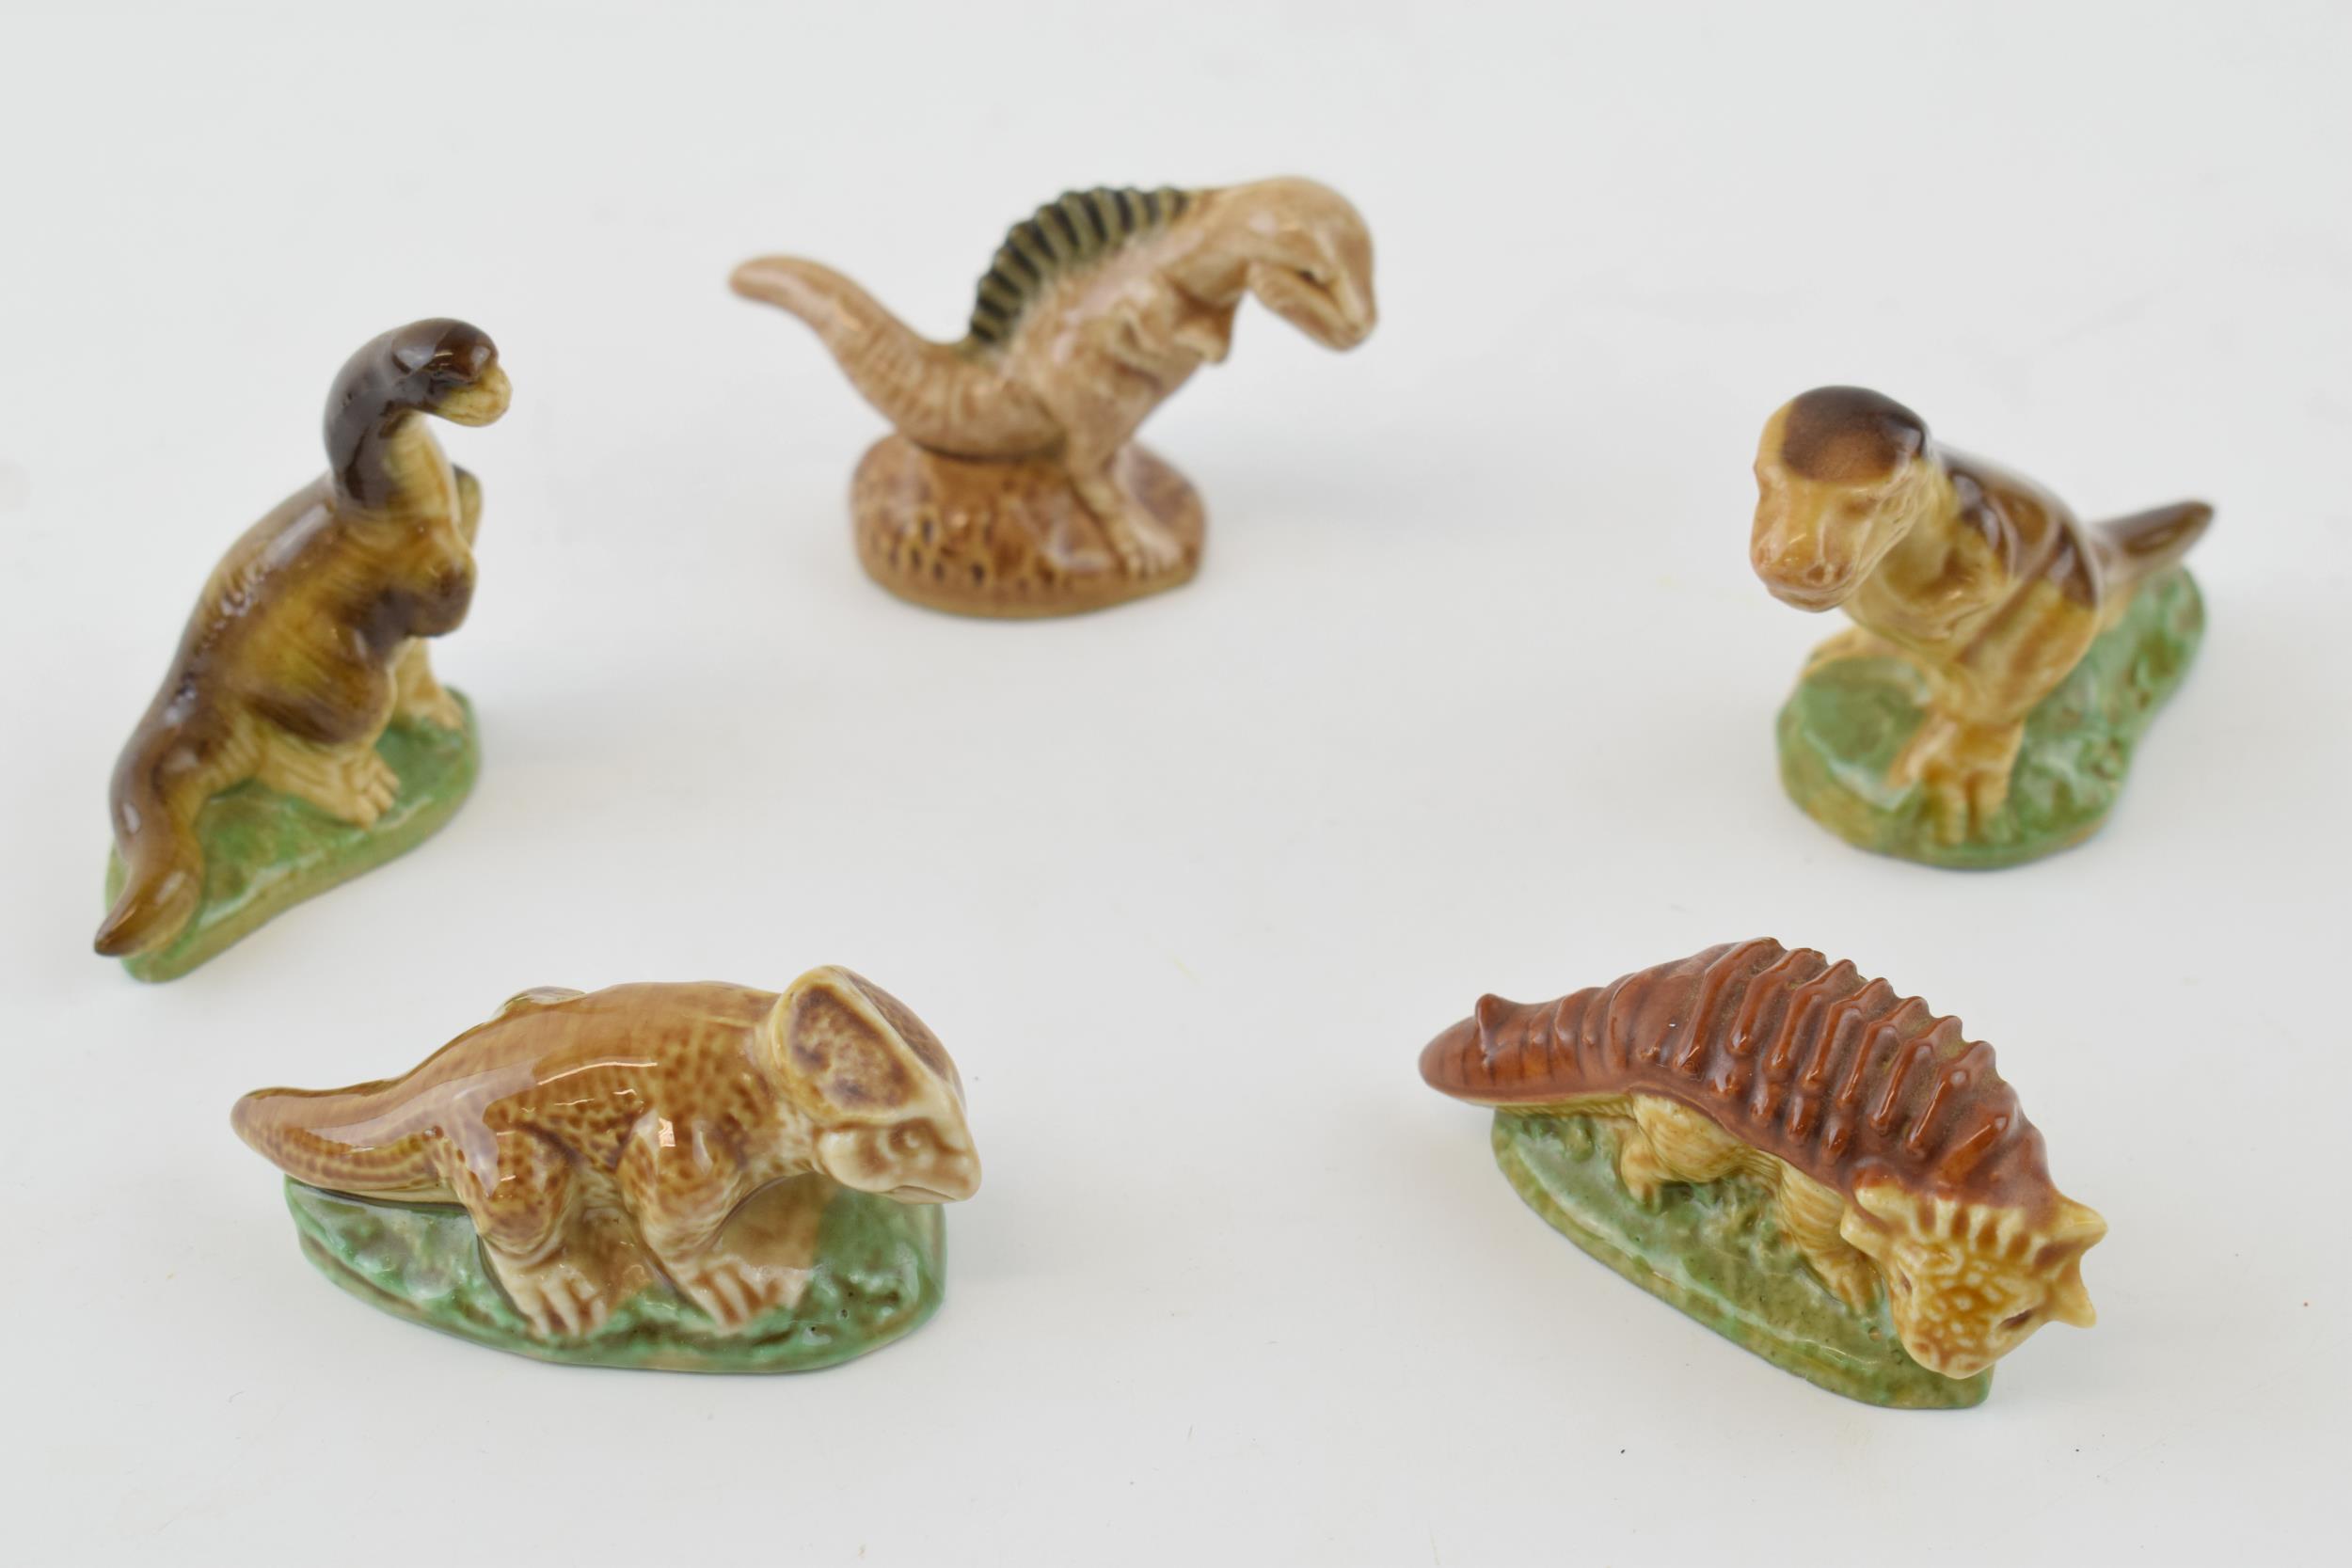 A collection of Wade Dinosaurs, set 1, issued in 1993 (5). In good condition with no obvious